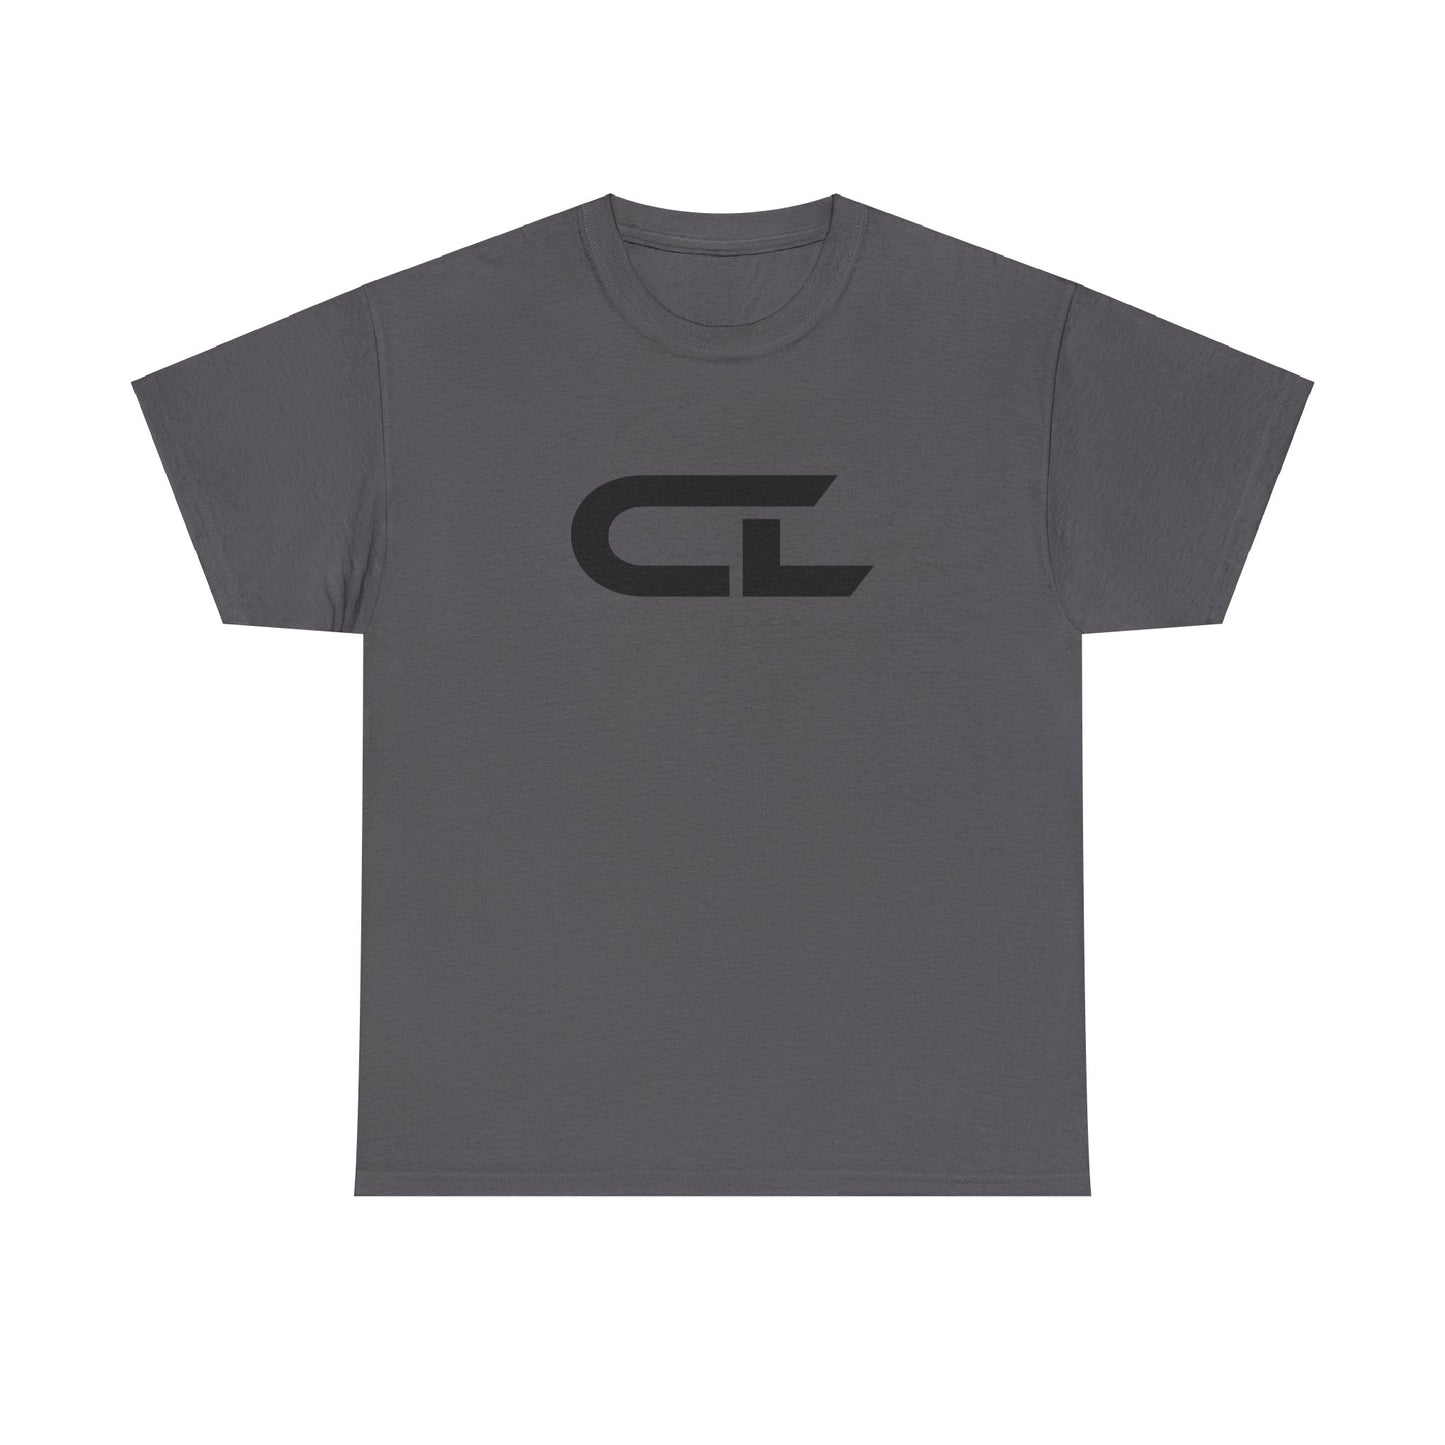 Connor Lair "CL" Tee